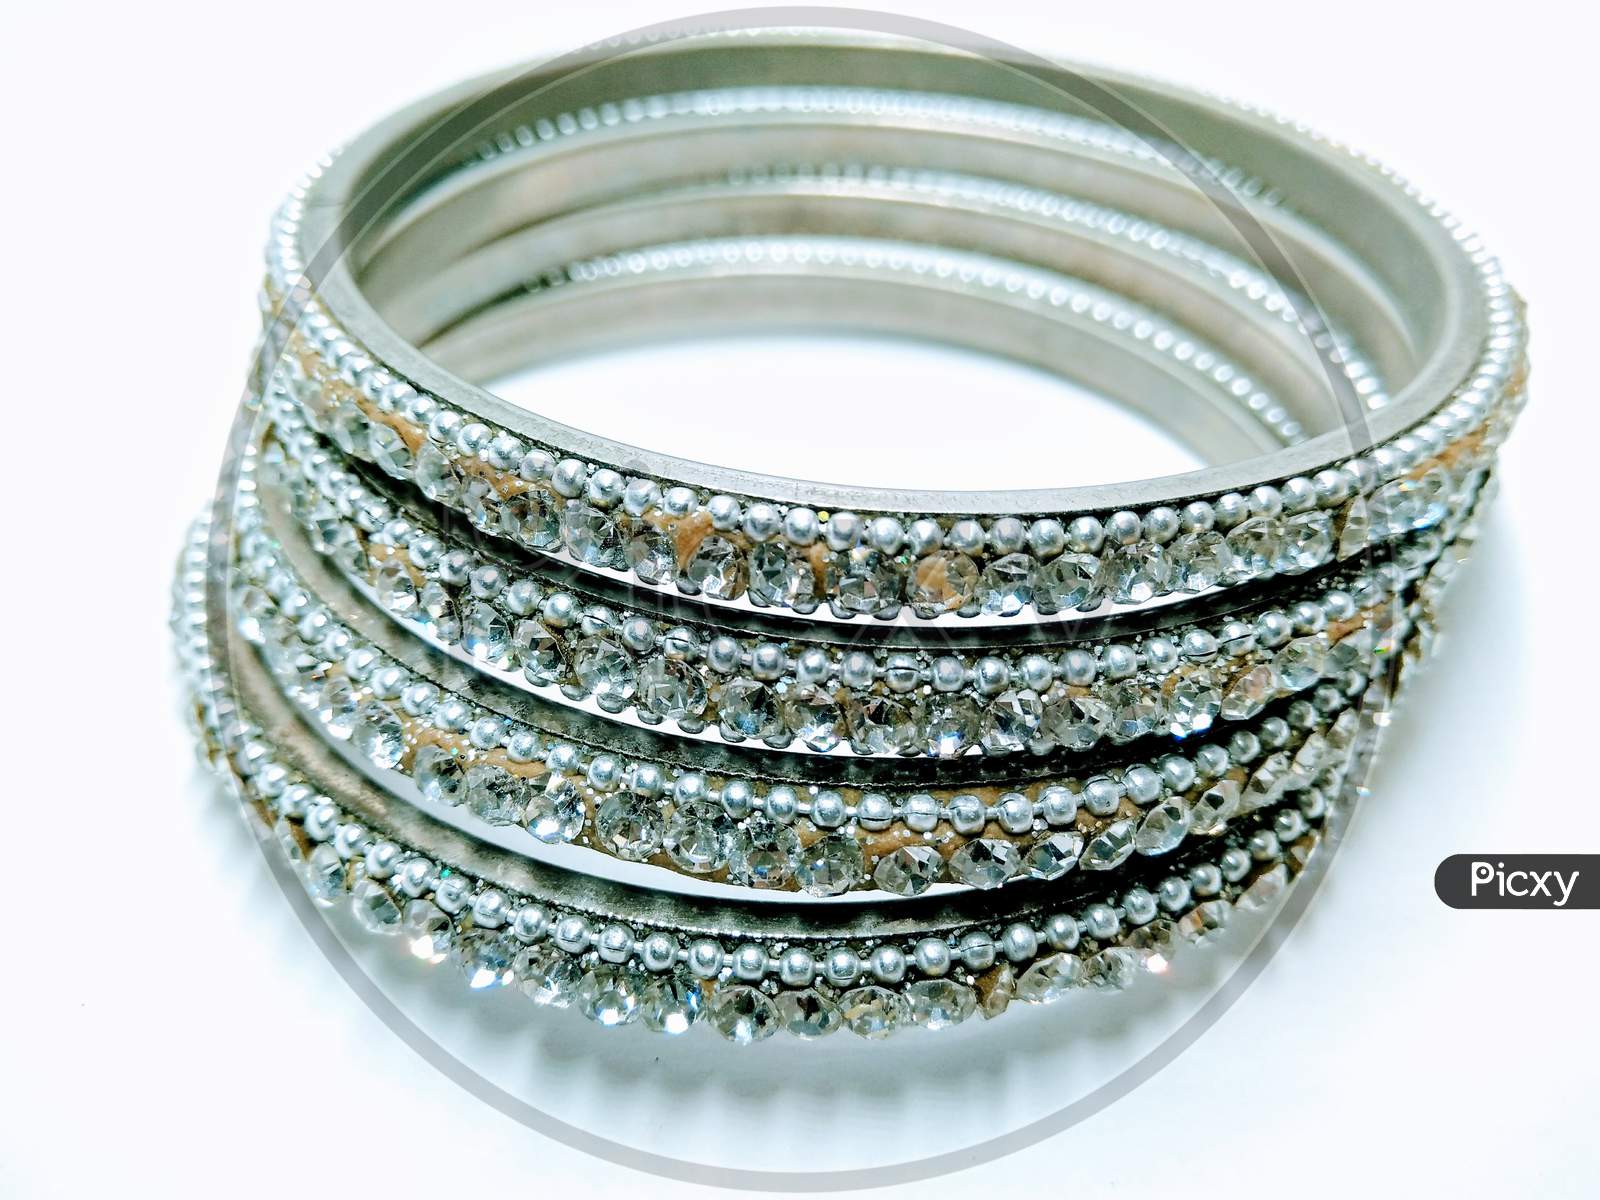 Silver Bangles Over an Isolated White Background